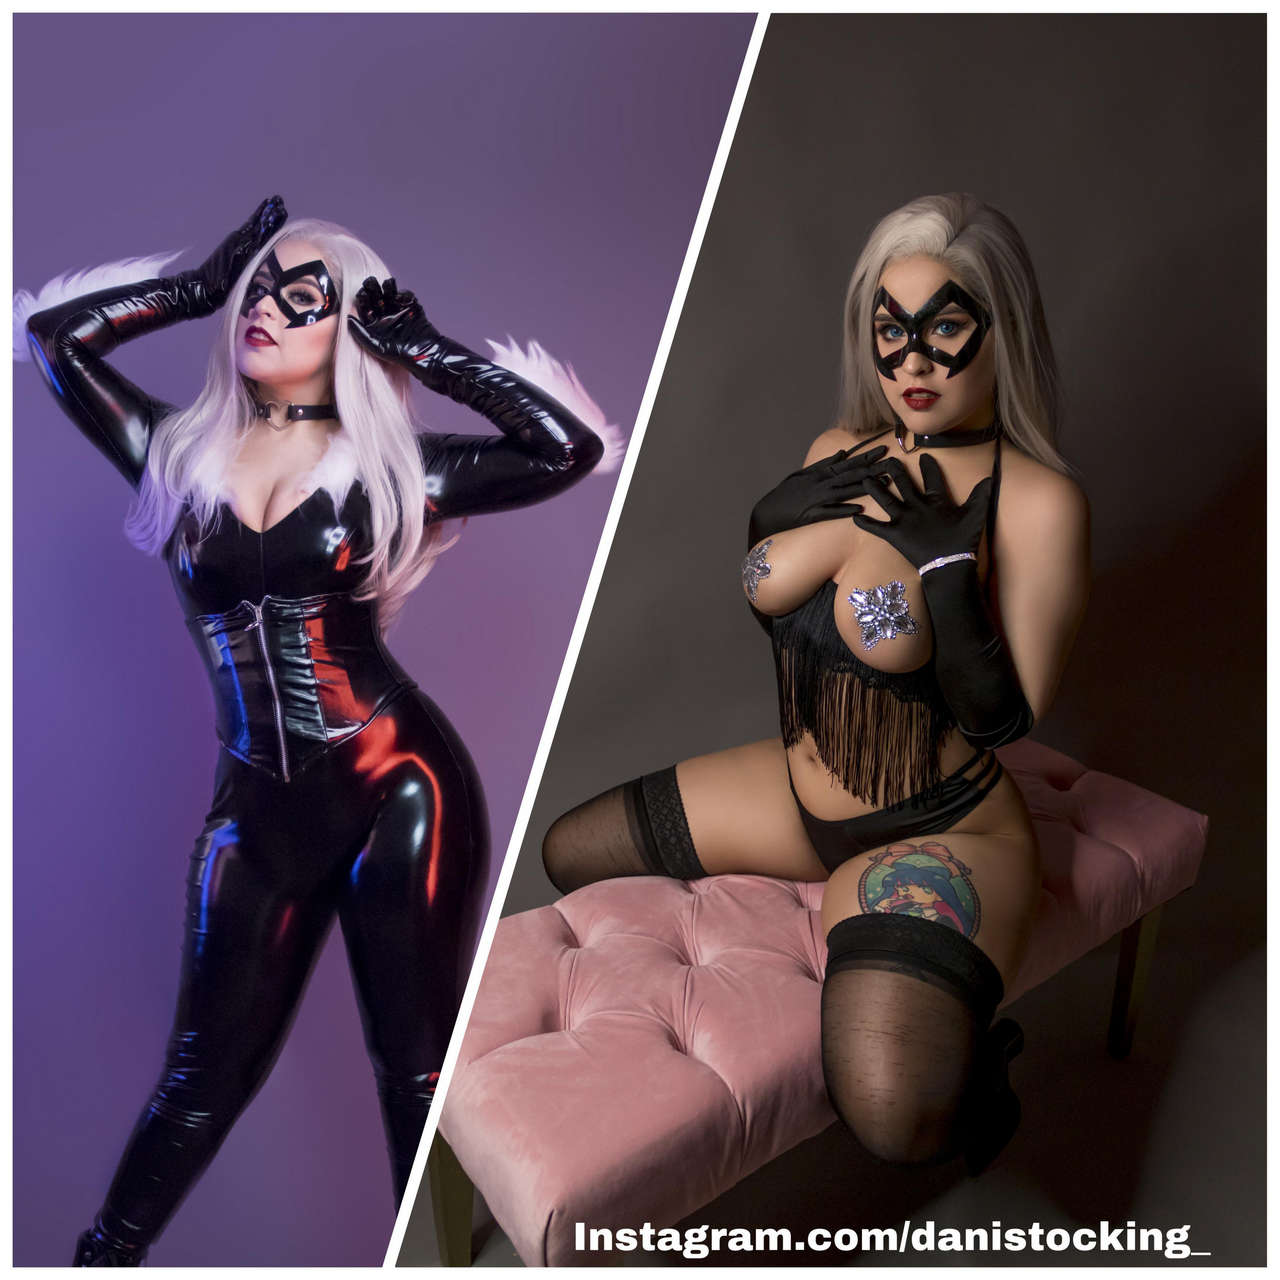 Dani Stocking As Black Cat From Spiderman In Cosplay And Boudoir Ver Self NSFW 0